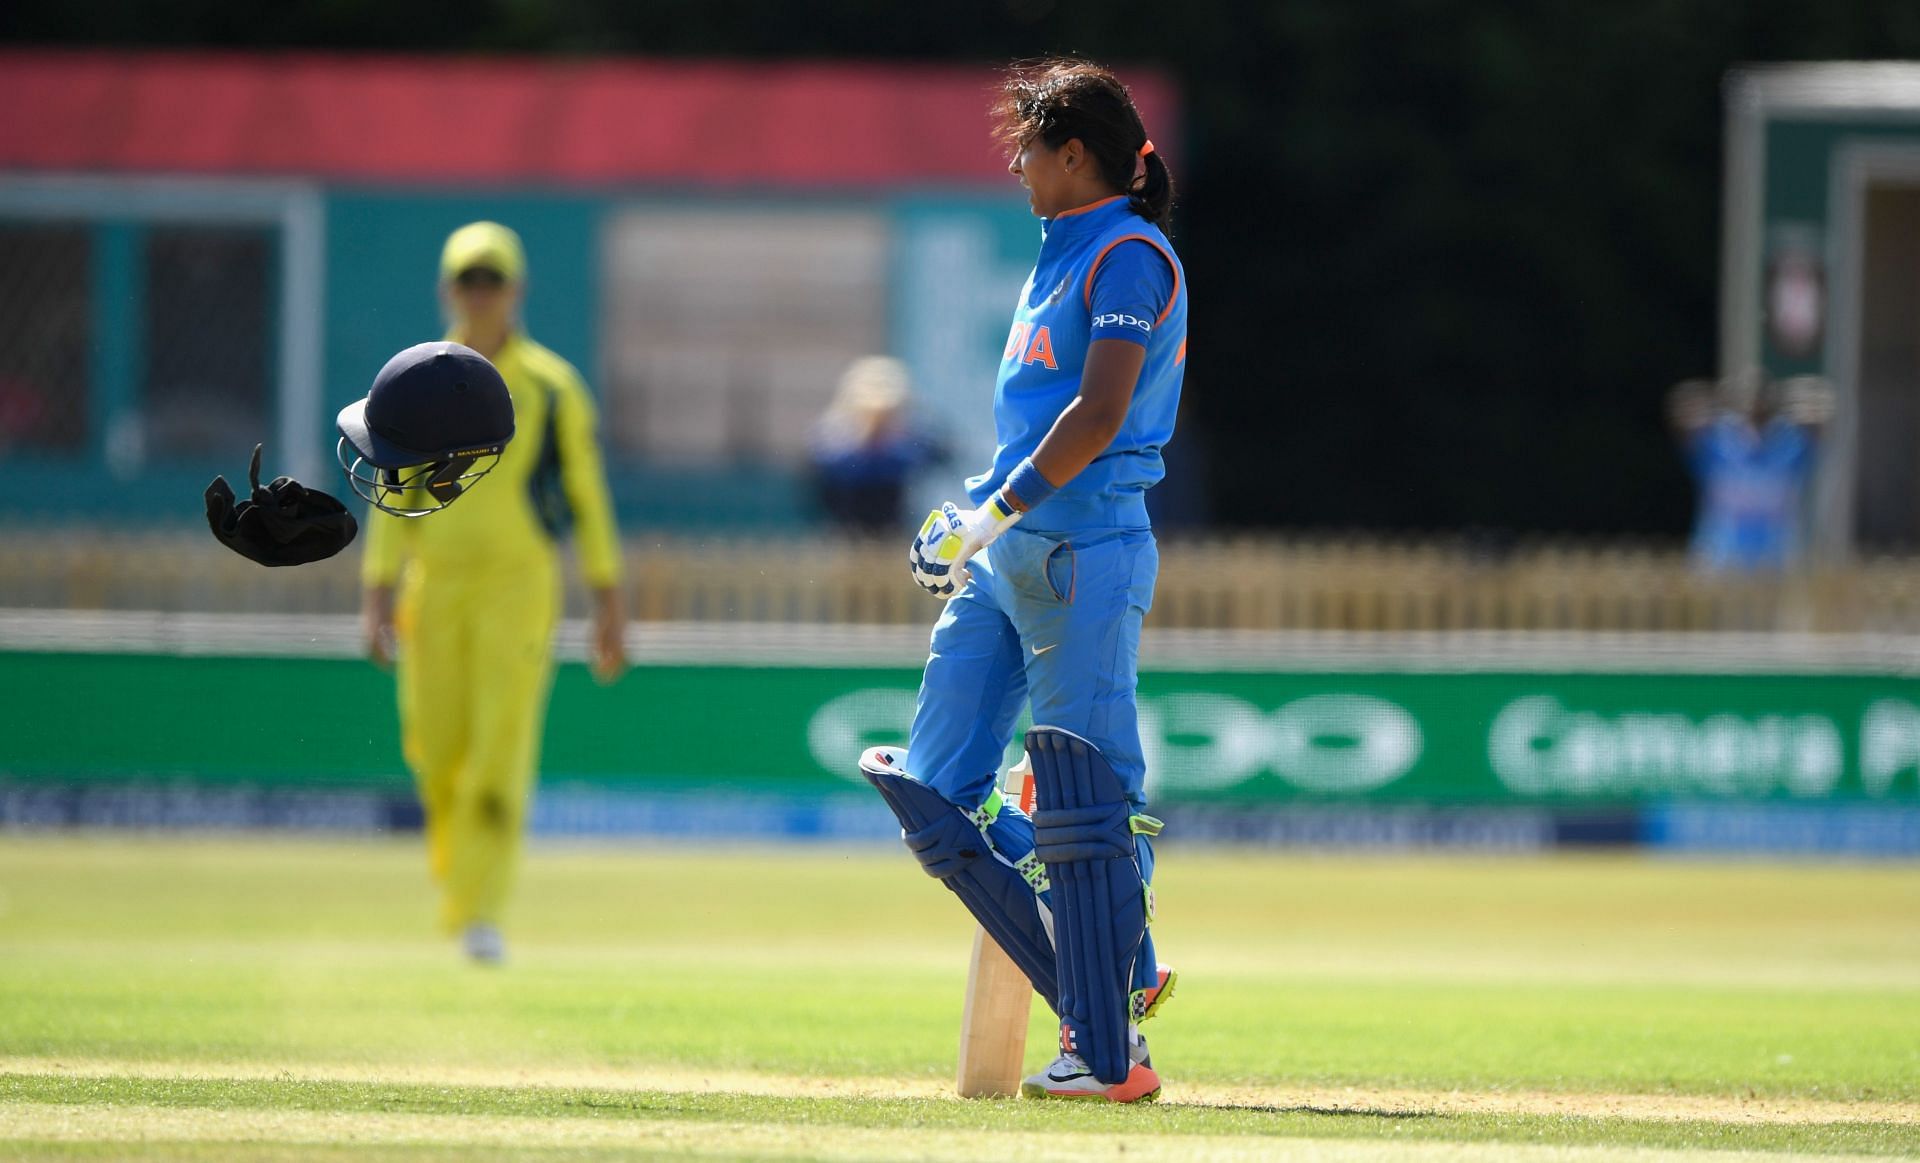 Harmanpreet has struggled when playing for India in recent times